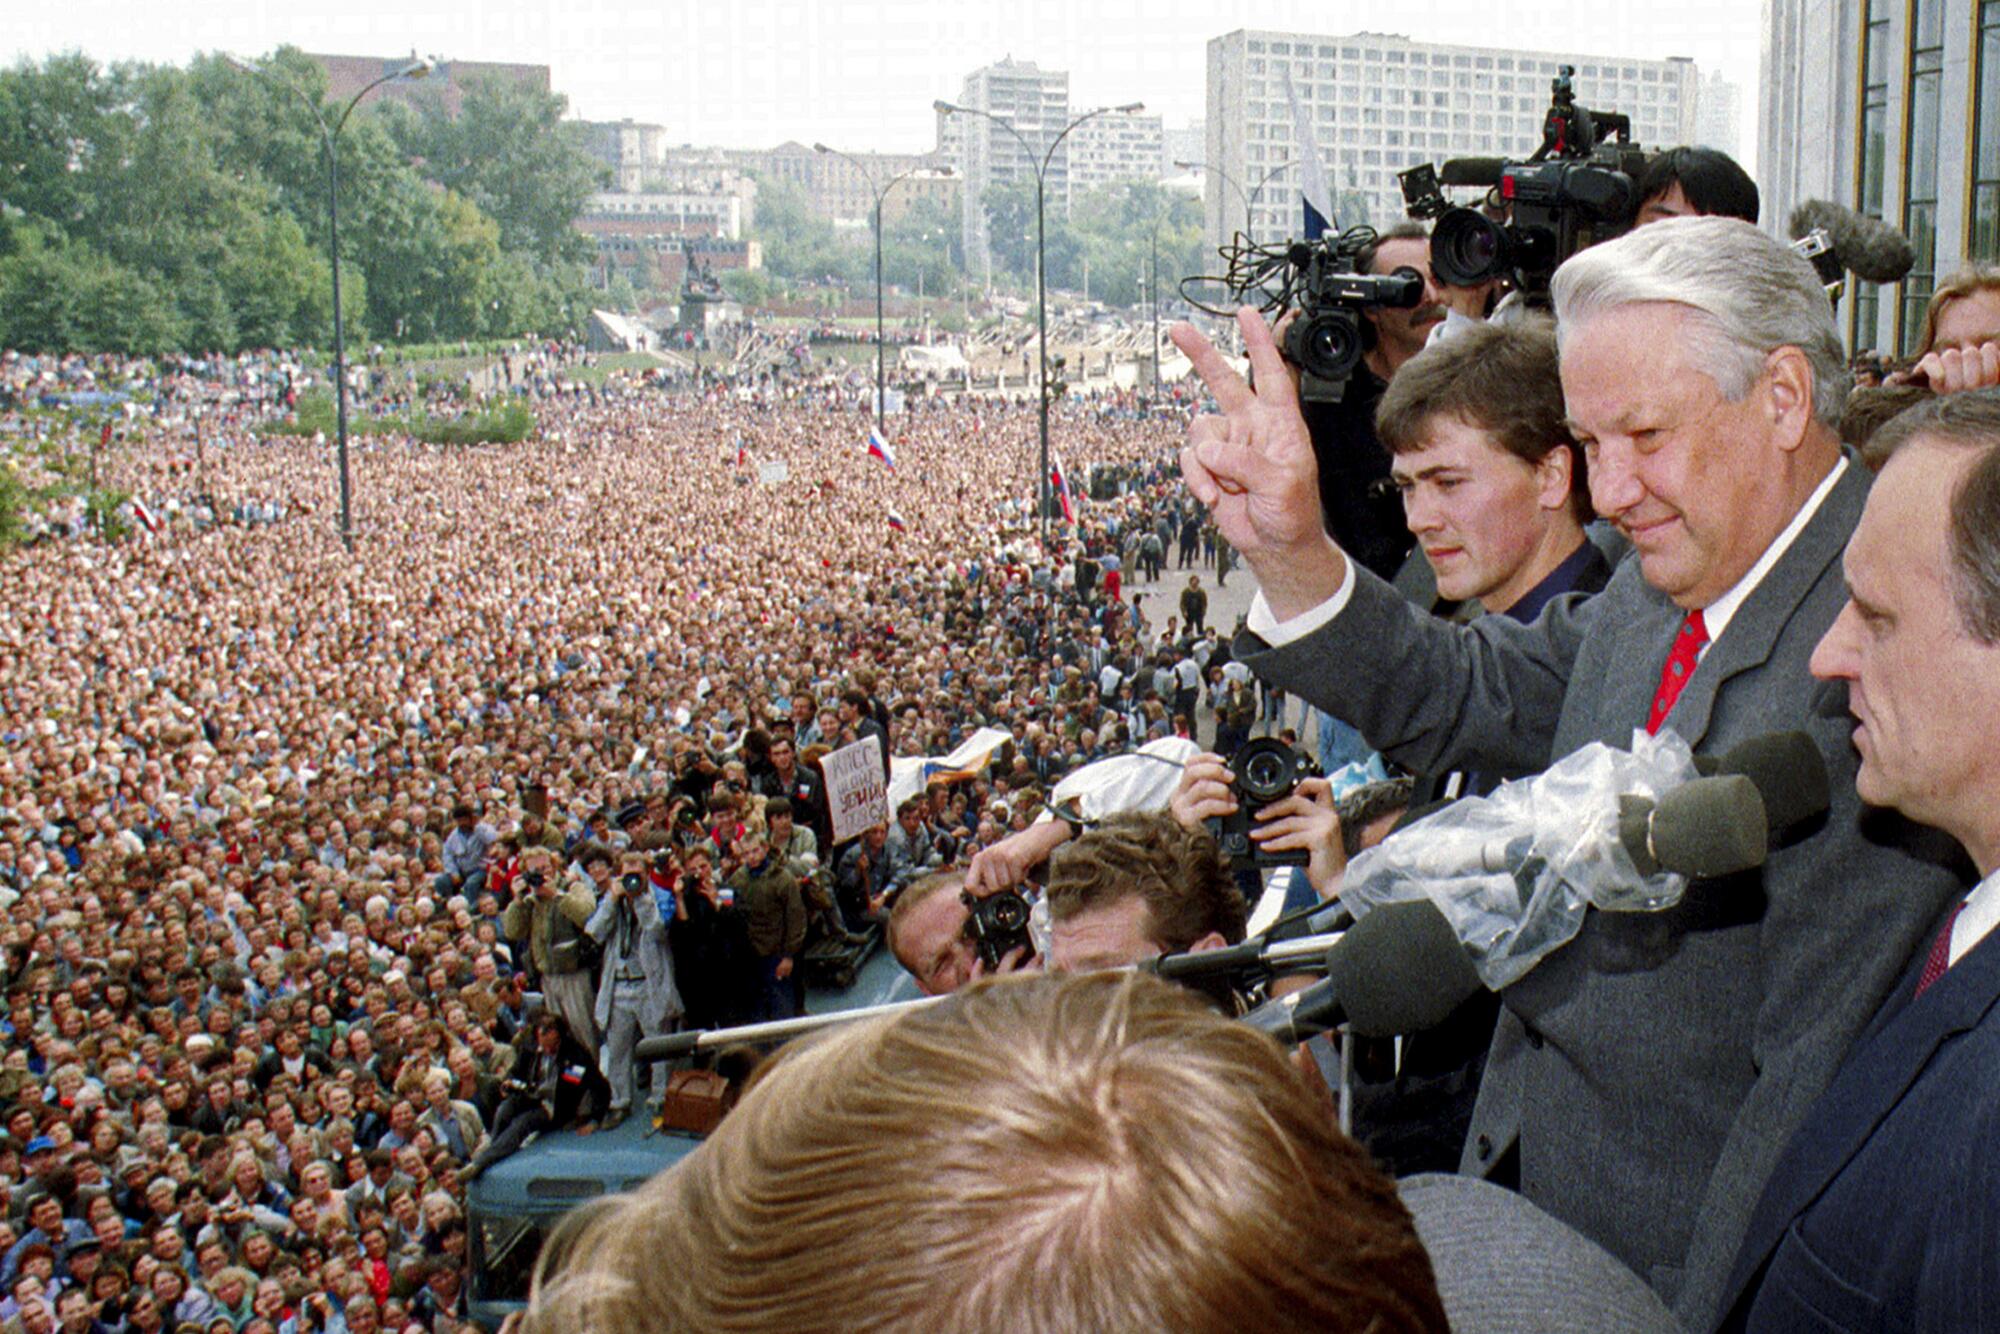 A man, second from right, in a gray suit and red tie makes a V sign as he looks to the masses gathered below him 